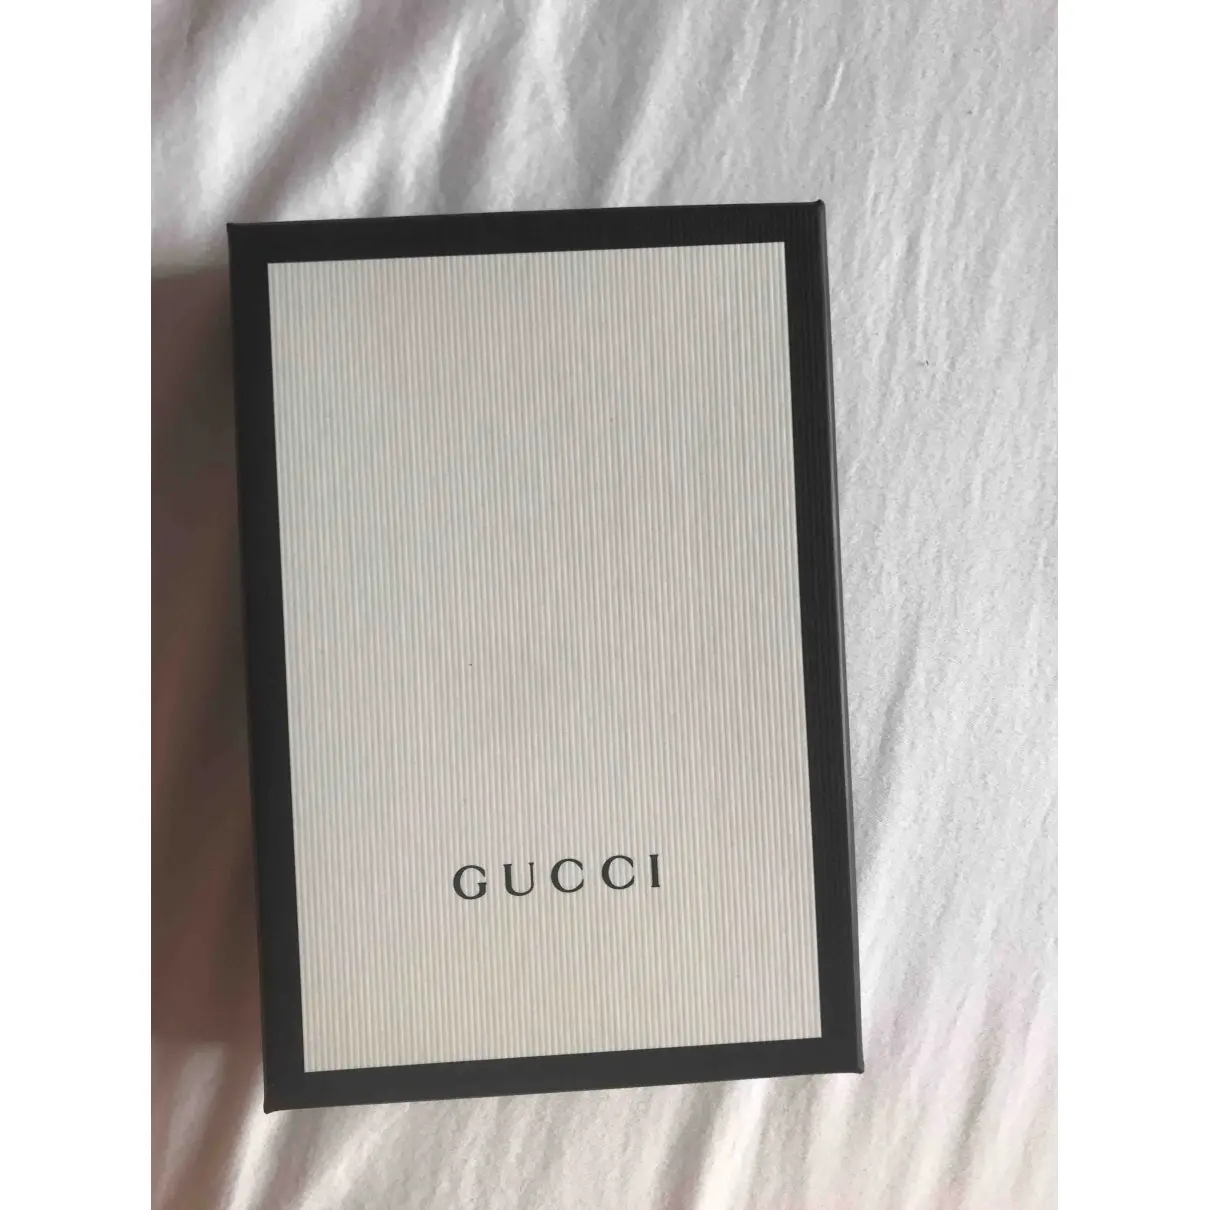 Buy Gucci Iphone case online